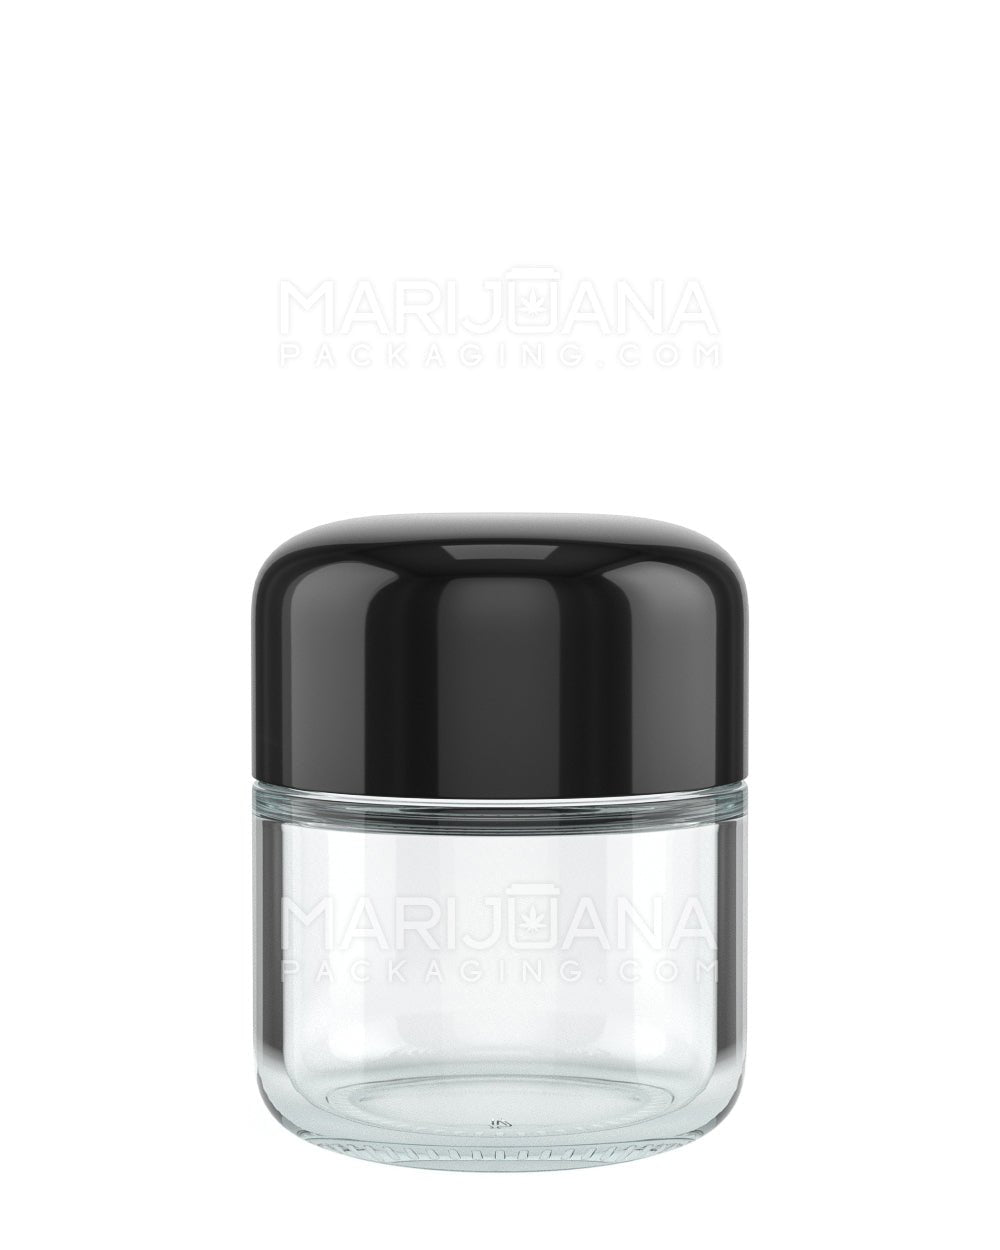 Child Resistant | Rounded Base Clear Glass Jars w/ Smooth Black Dome Cap | 55mm - 2oz - 200 Count - 1